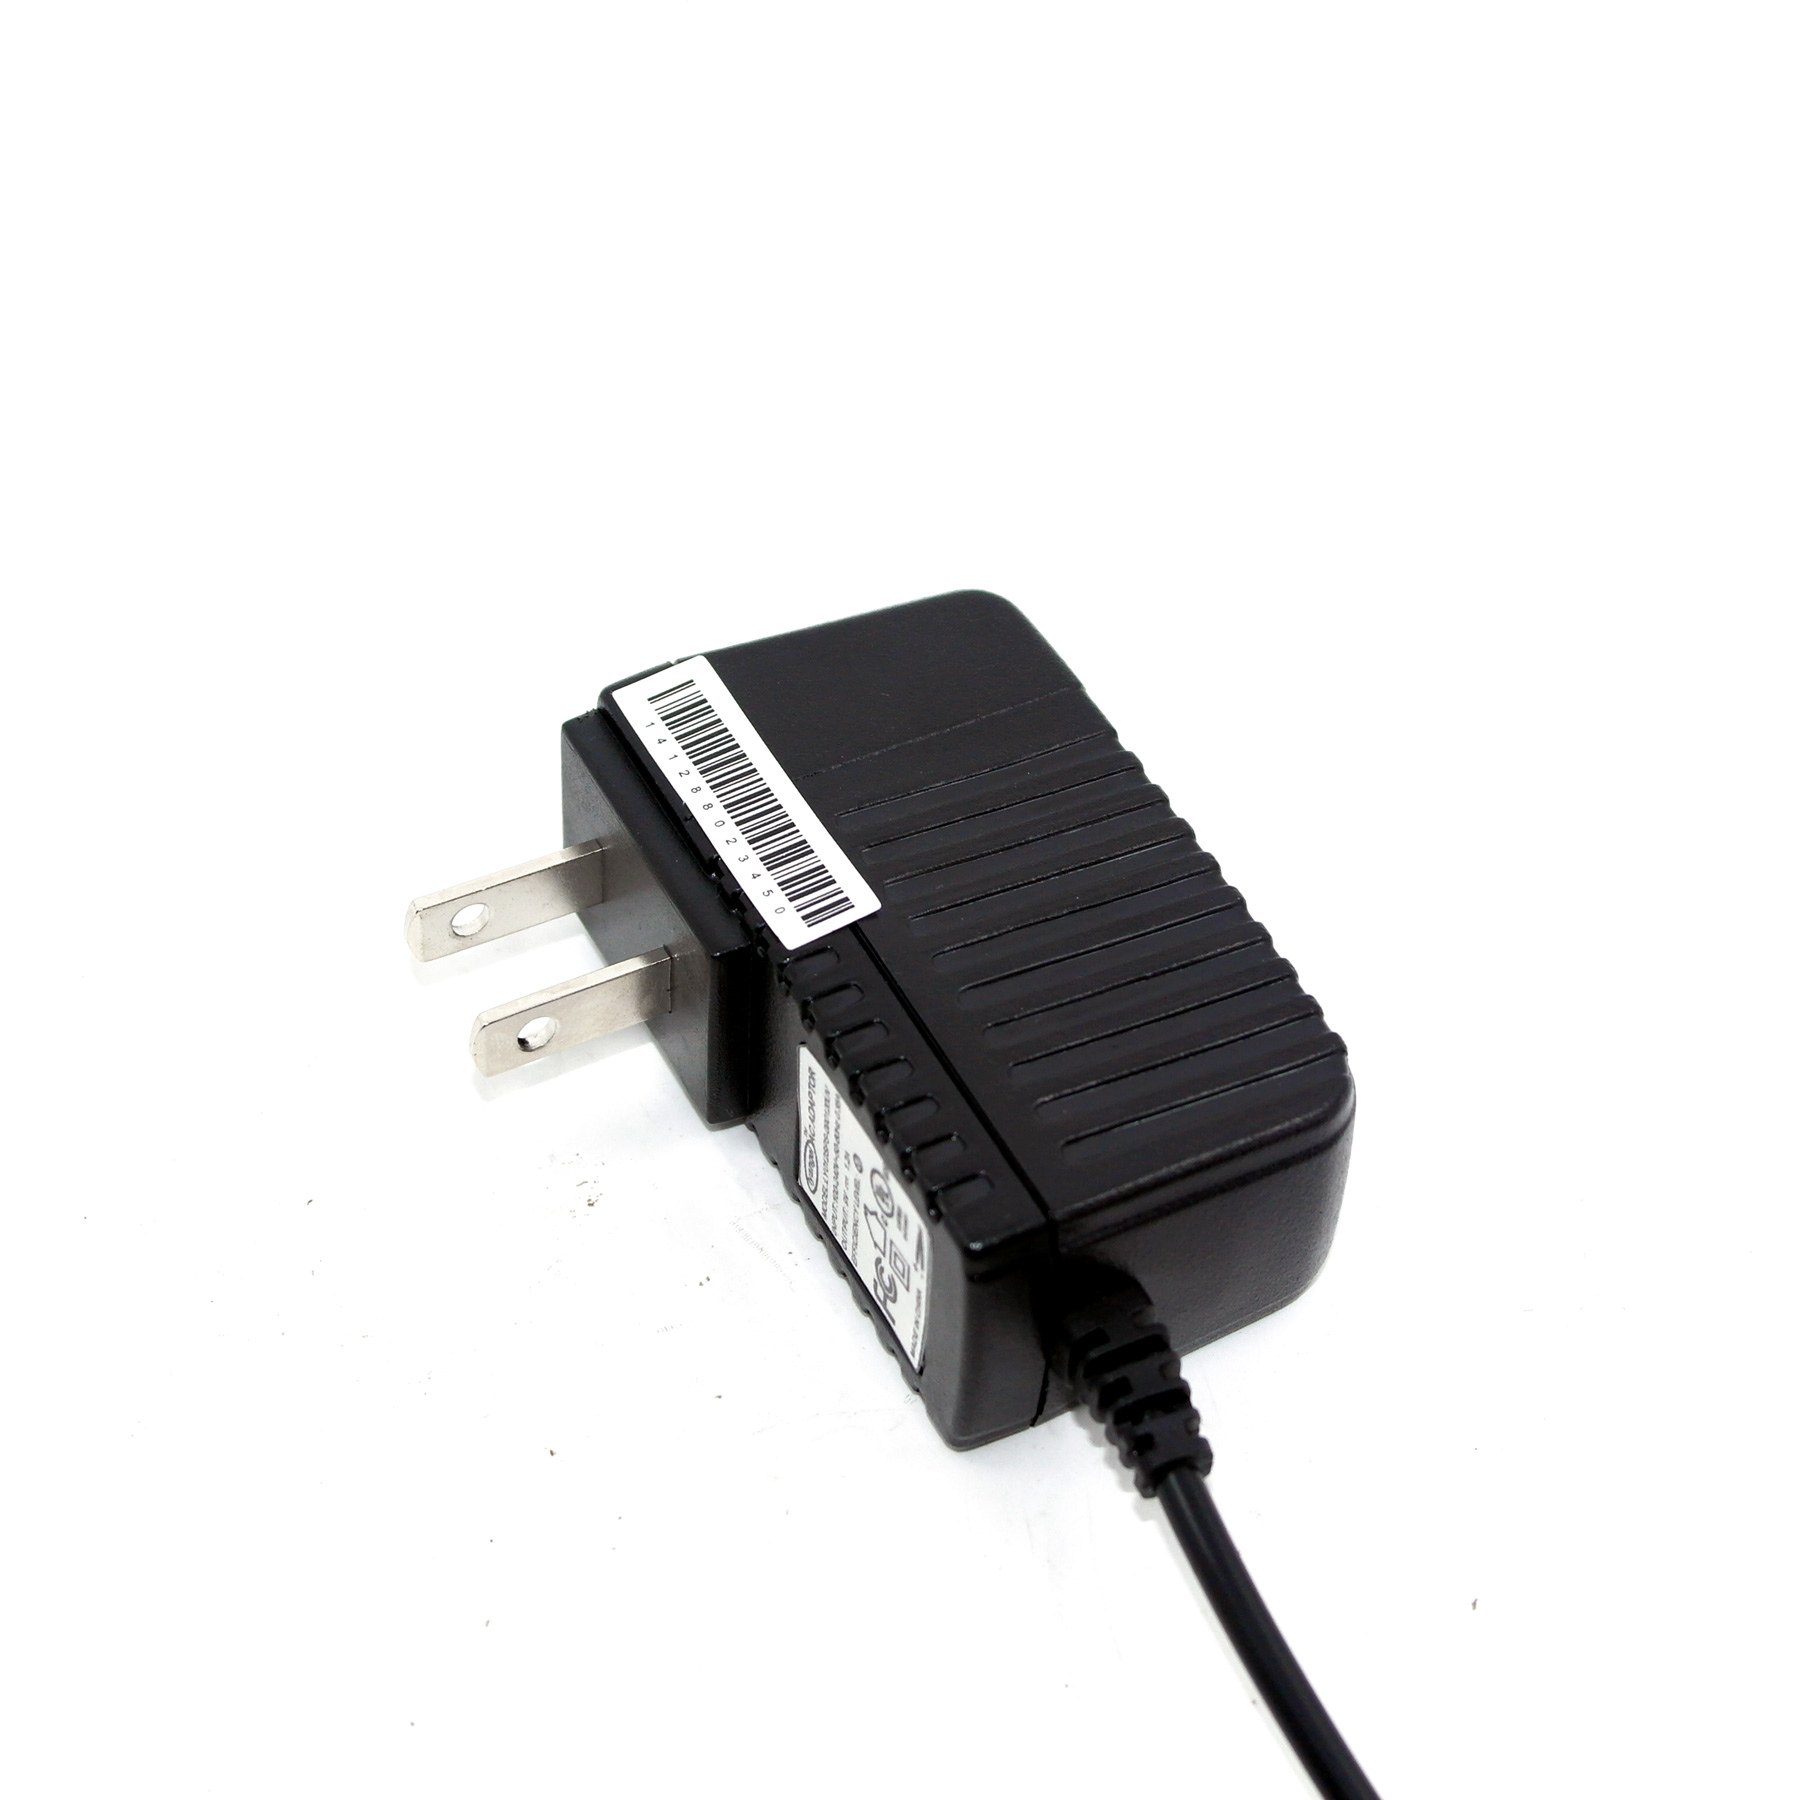 KRE-0502003,5V 2A 10W UL FCC ROHS adaptor, switching power adapter